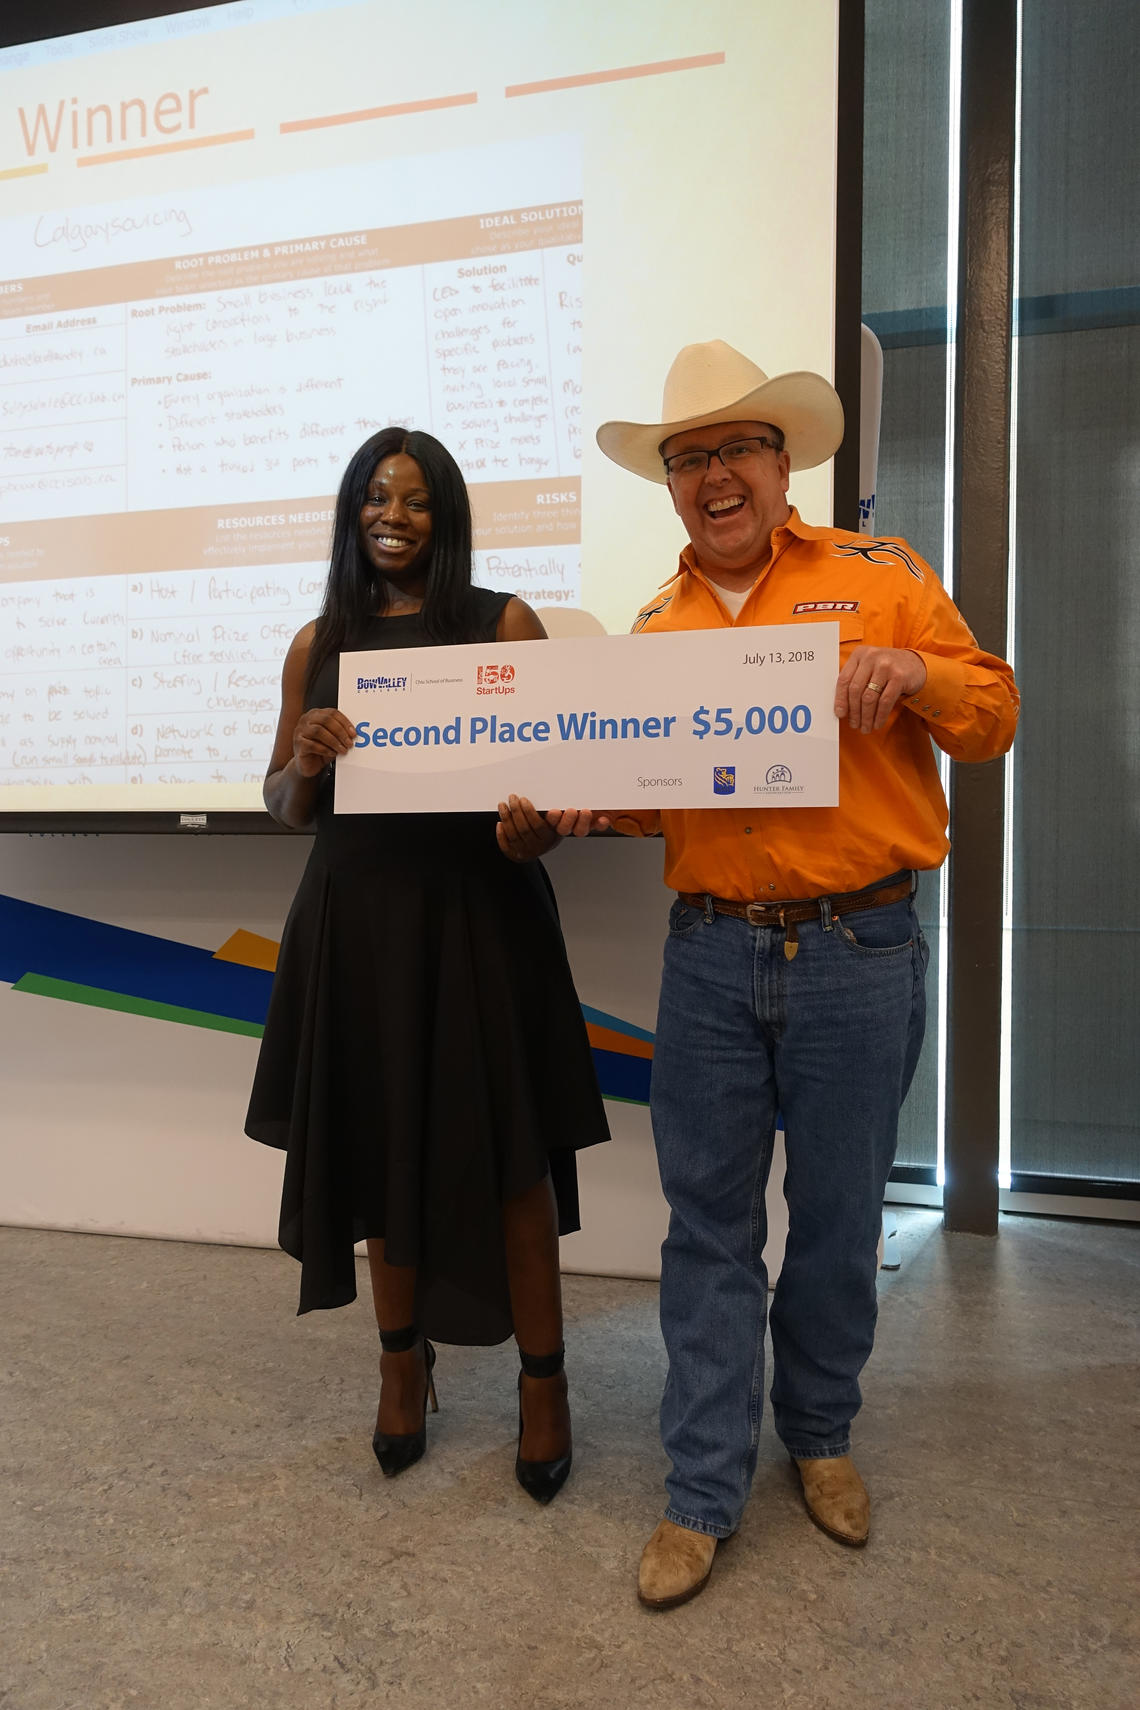 Erica Hughes, founder of CareFind and second-place winner in the Innovation Rodeo Finals, with Craig Elias, Entrepreneur in Residence at Bow Valley College and the "chief wrangler" of the event.